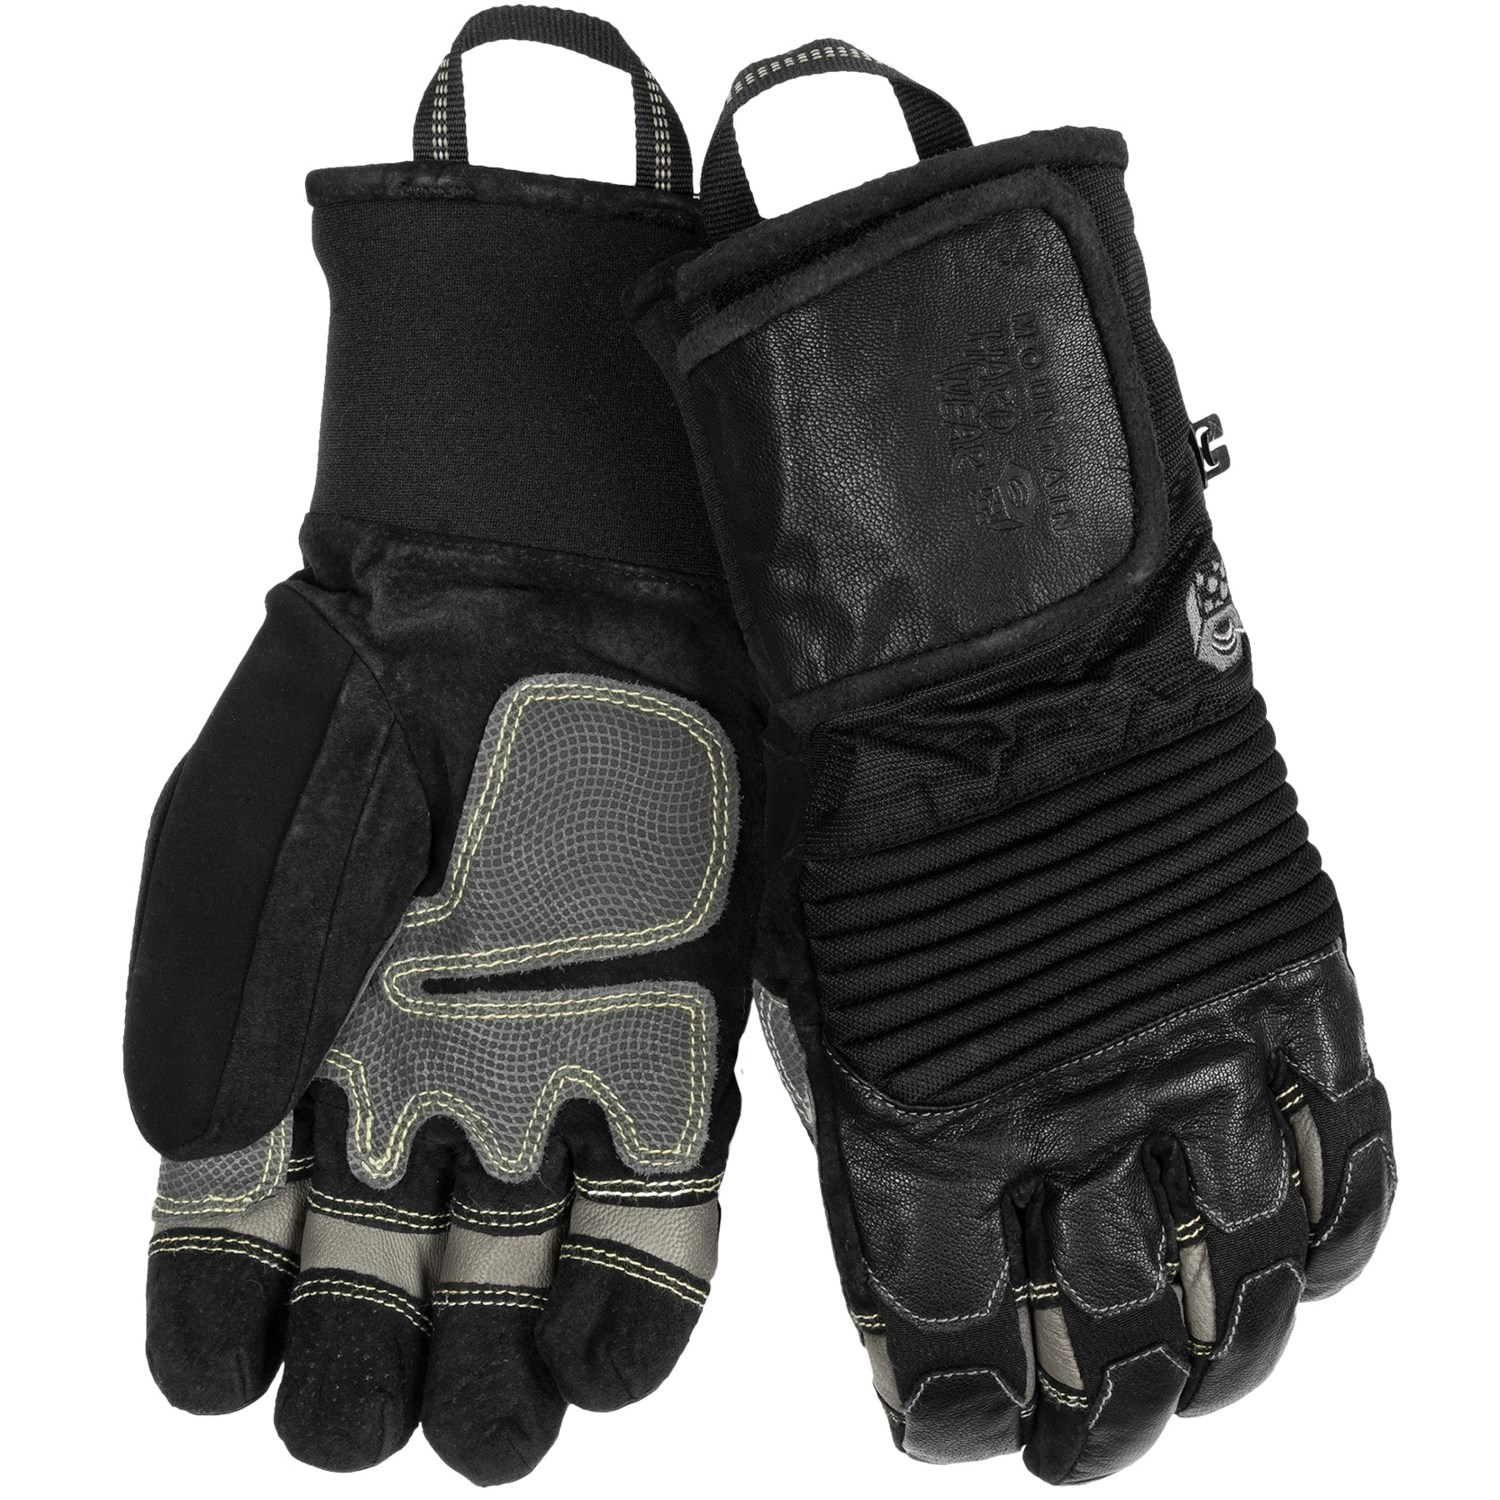 Mountain Hardwear Dragon’s Claw Gloves   Waterproof, Insulated (For 